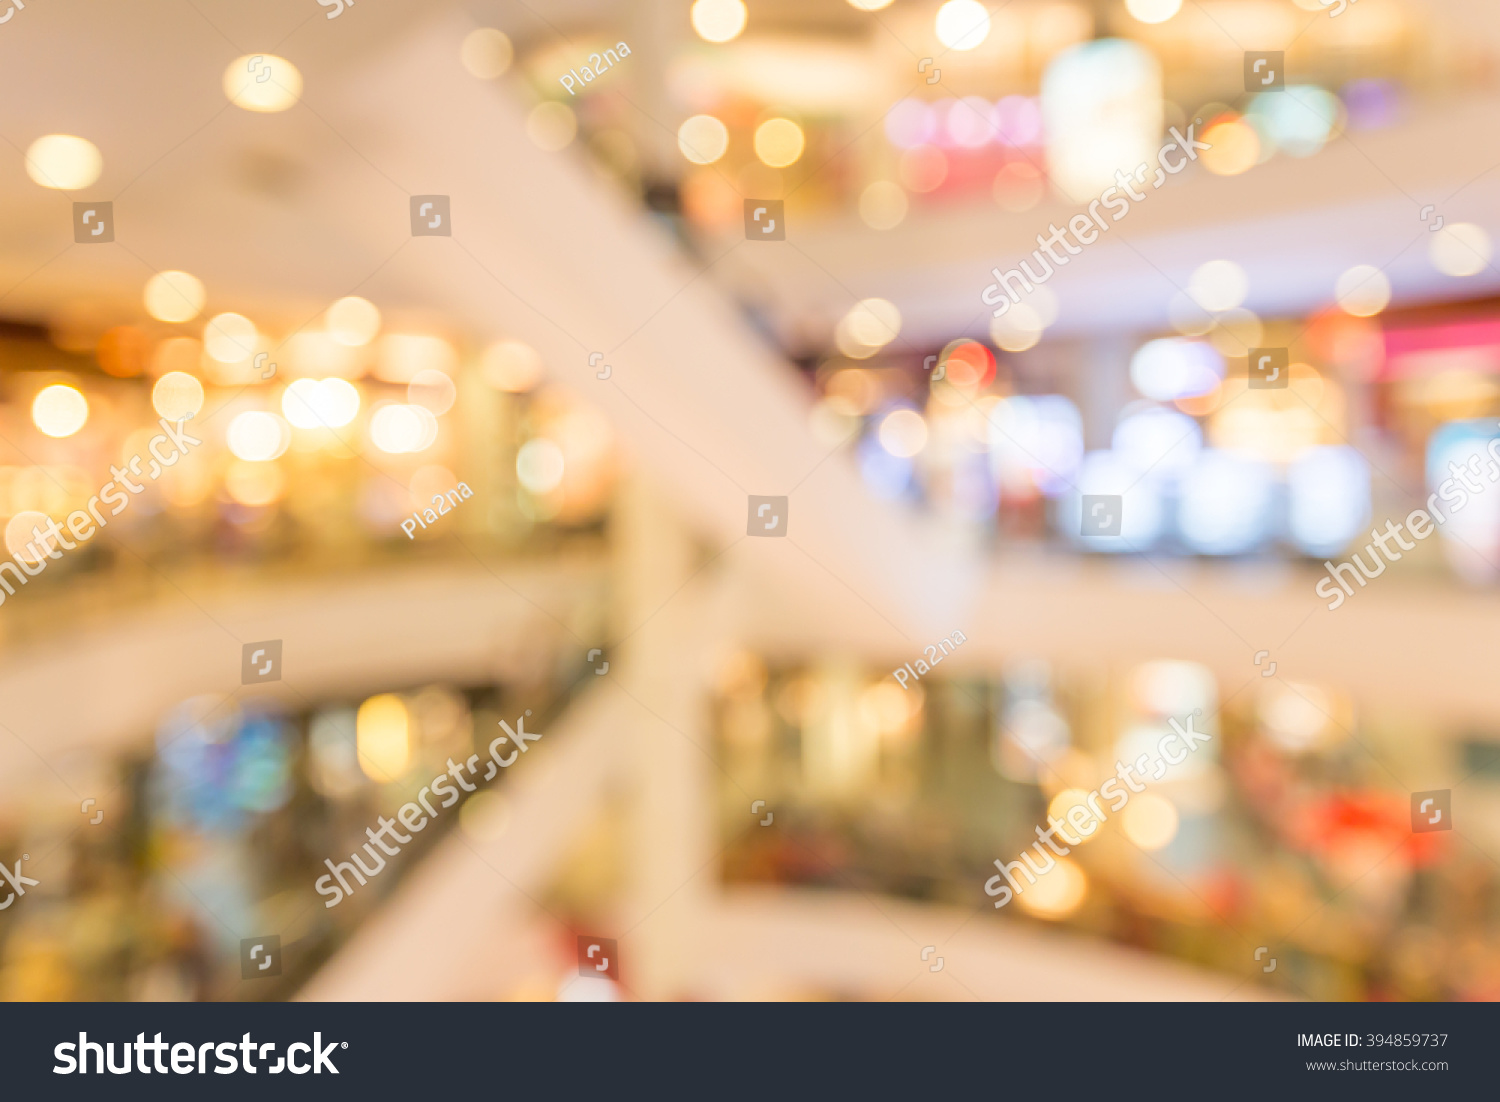 Department store shopping mall blur background with bokeh - Warm lighting decoration #394859737